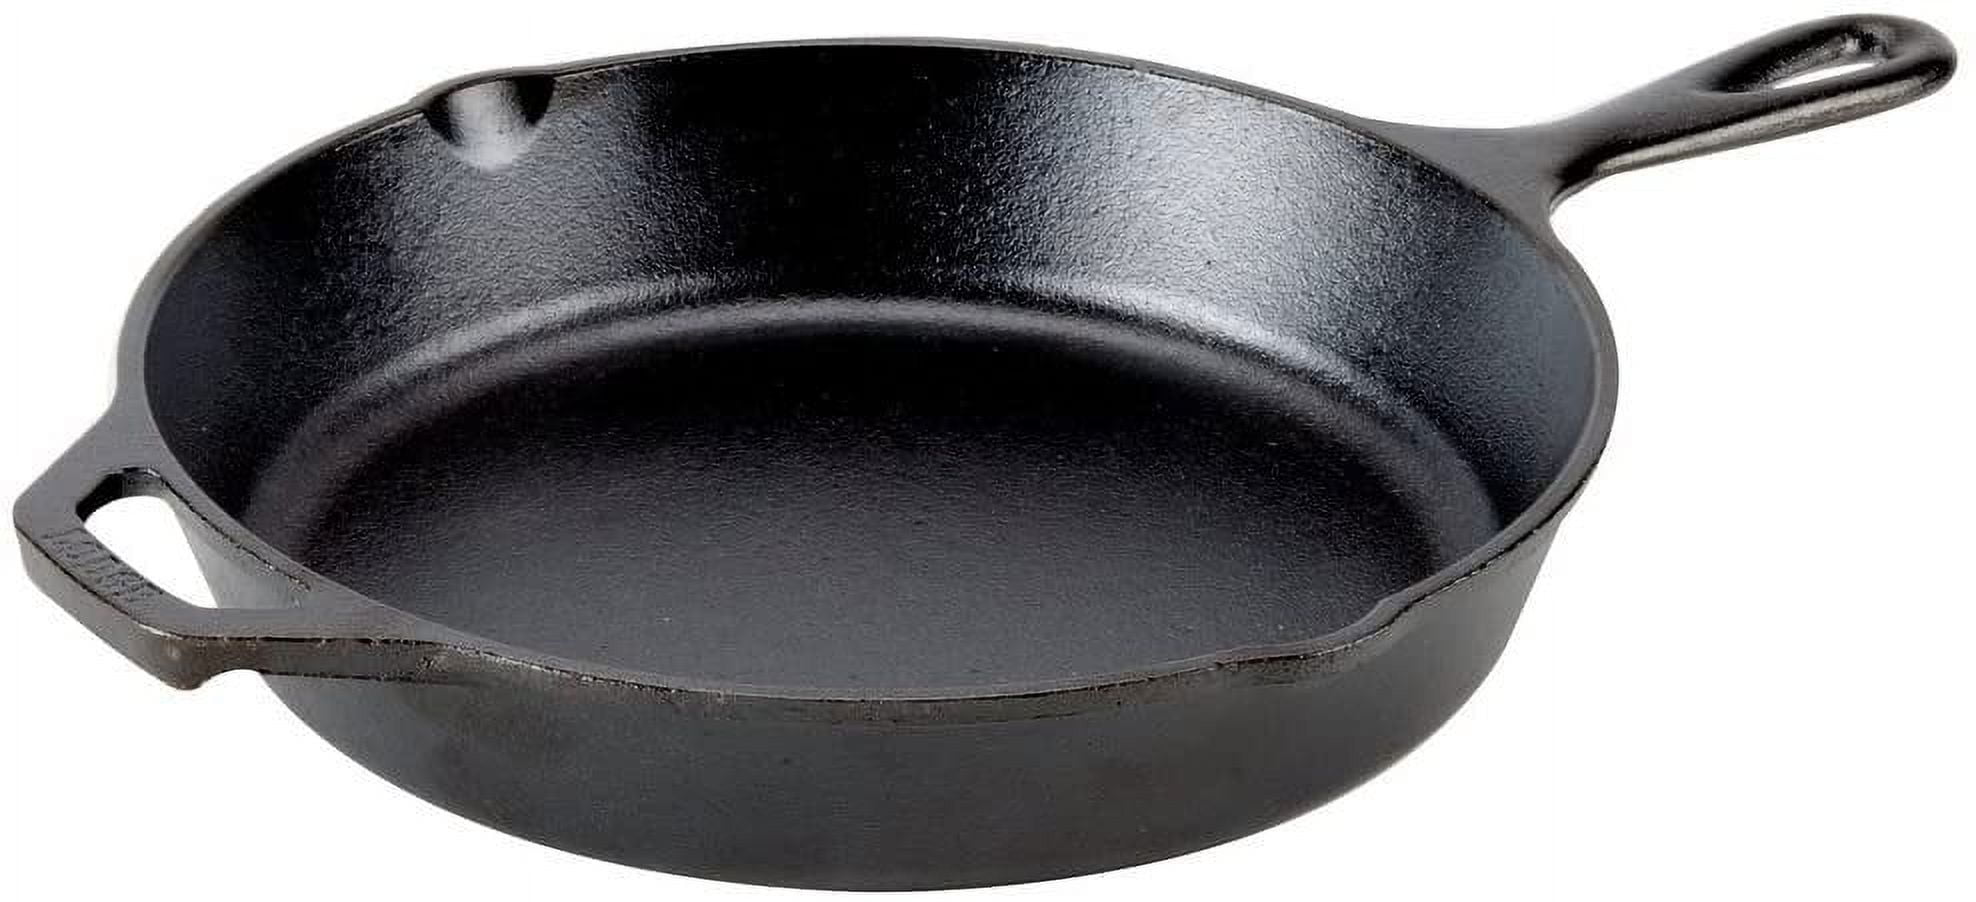 Pre-Seasoned Cast Iron Skillet (Set of 3 Pcs) – 6 Inch, 8 Inch and 10 Inch  – Kichly